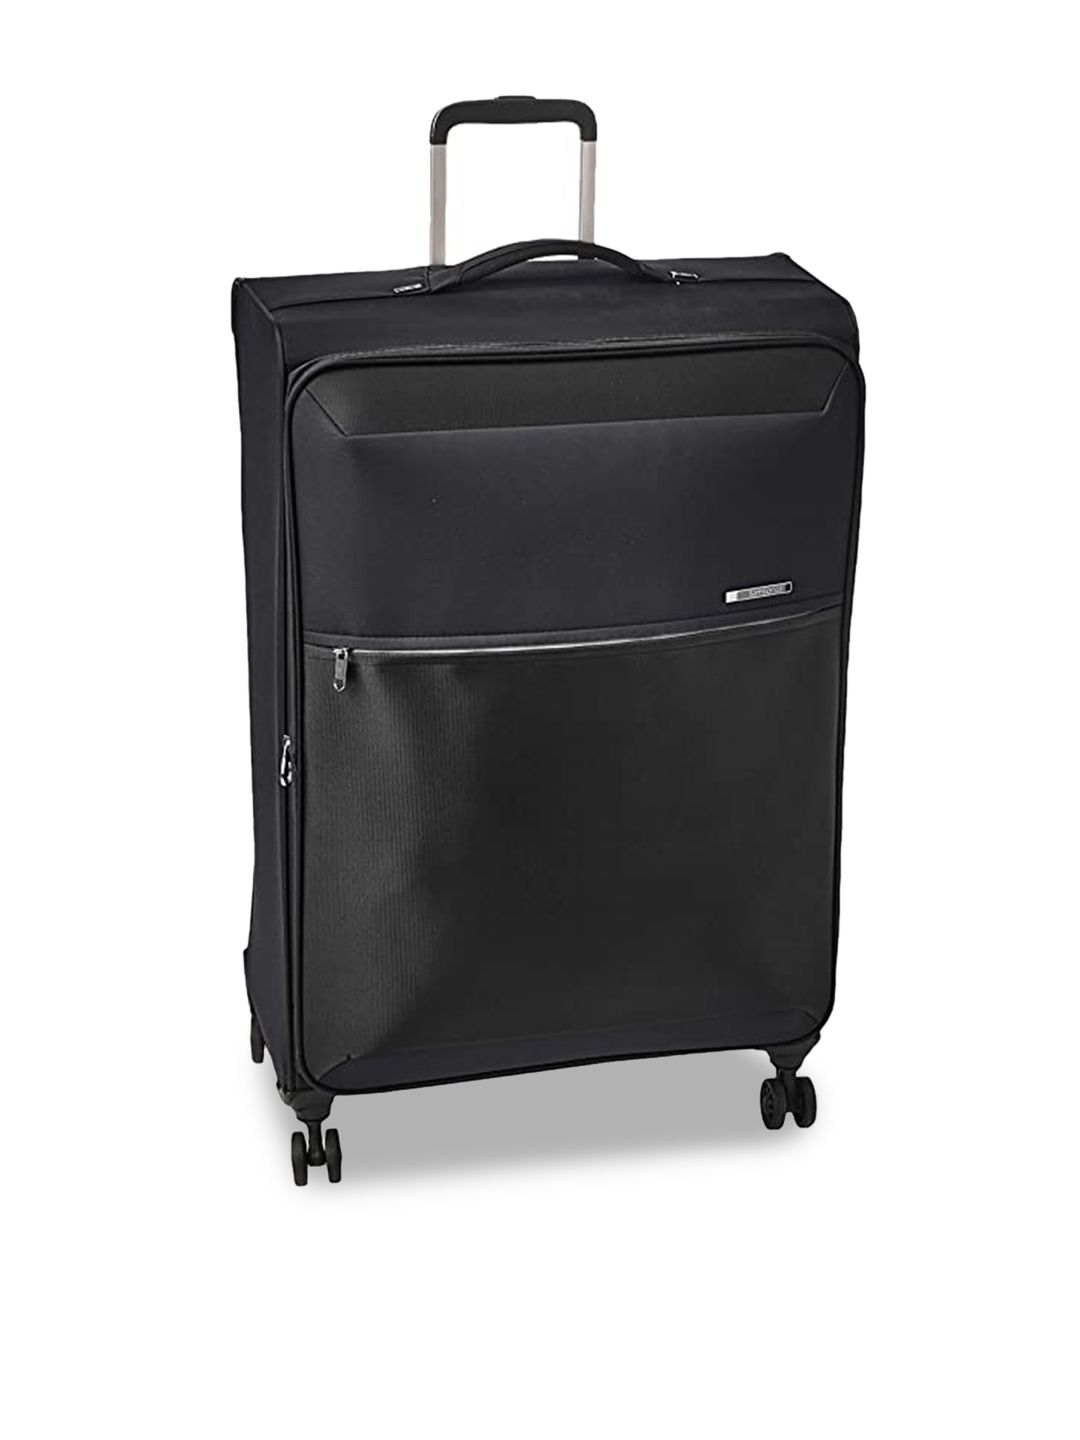 Samsonite Black Solid Soft Sided Large Trolley Suitcase Price in India